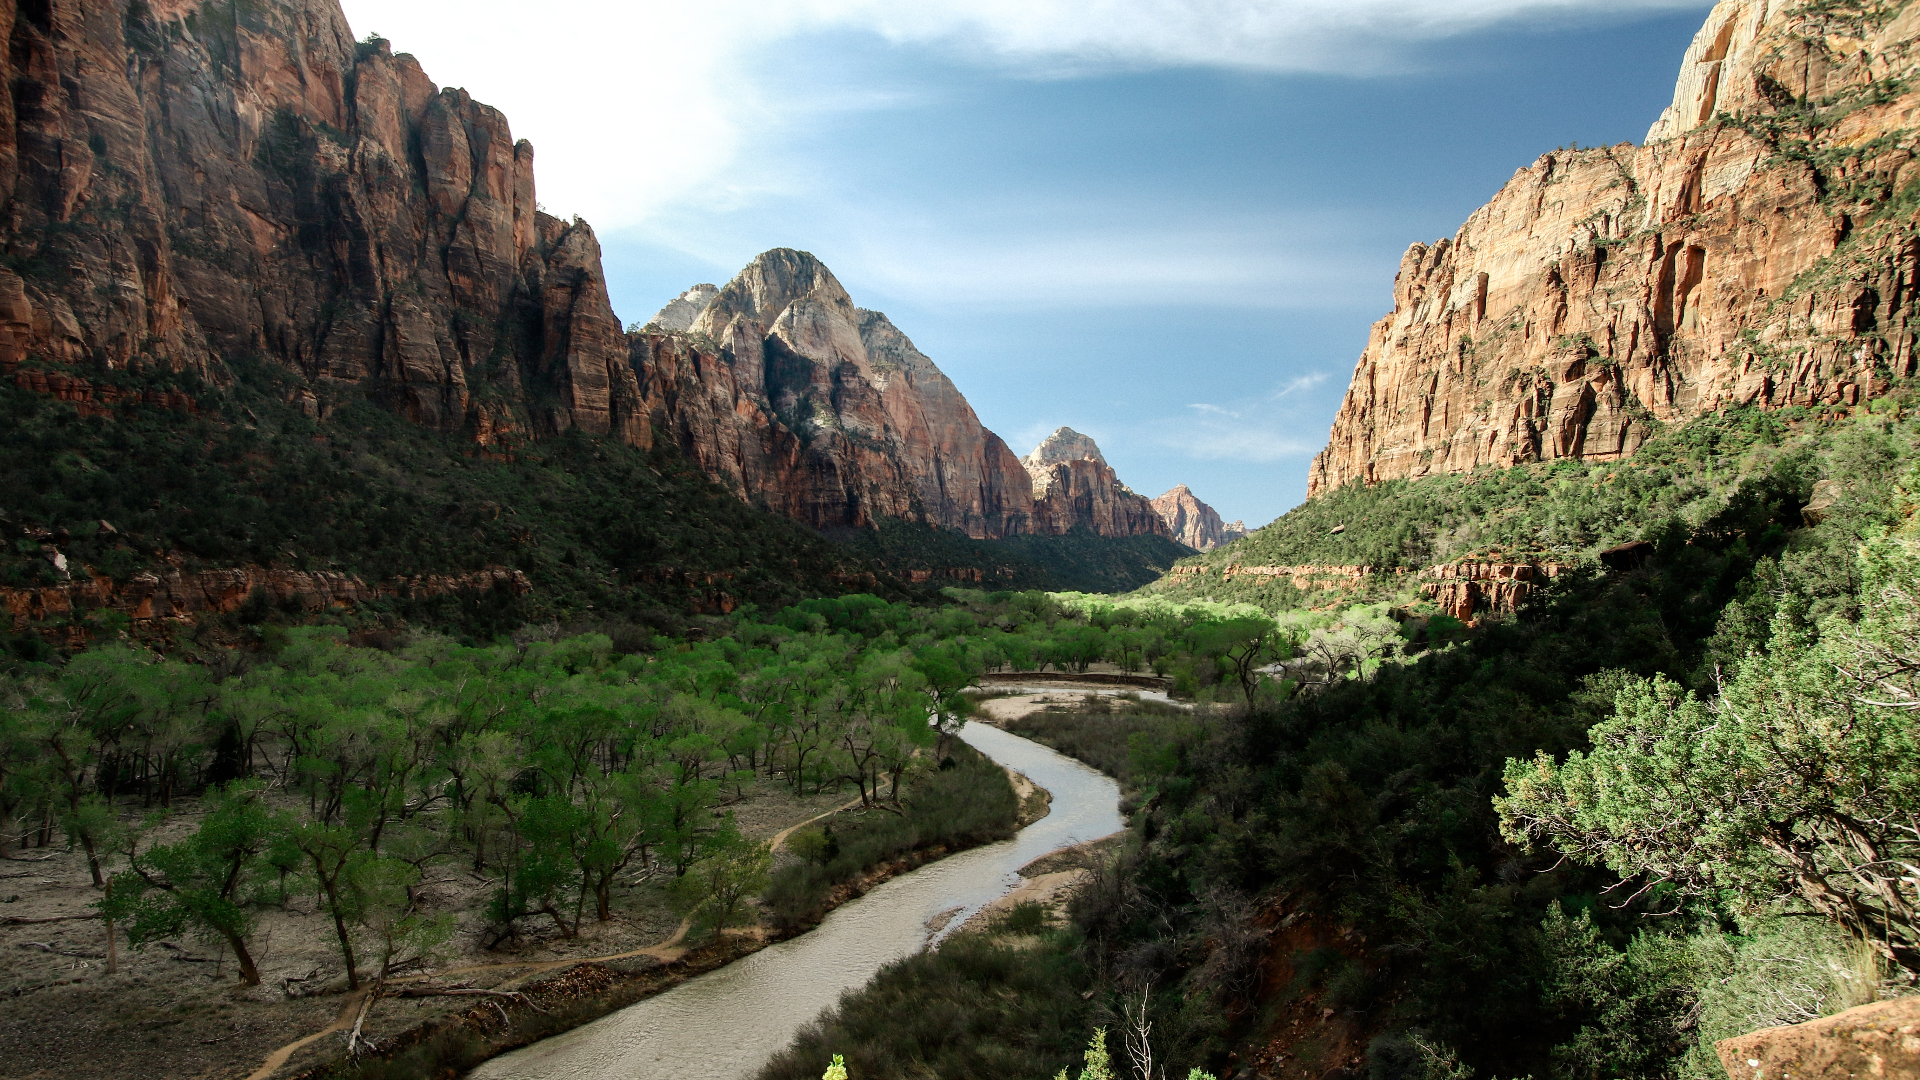 General 1920x1080 nature landscape mountains trees rocks plants clouds sky valley canyon Zion National Park USA Utah